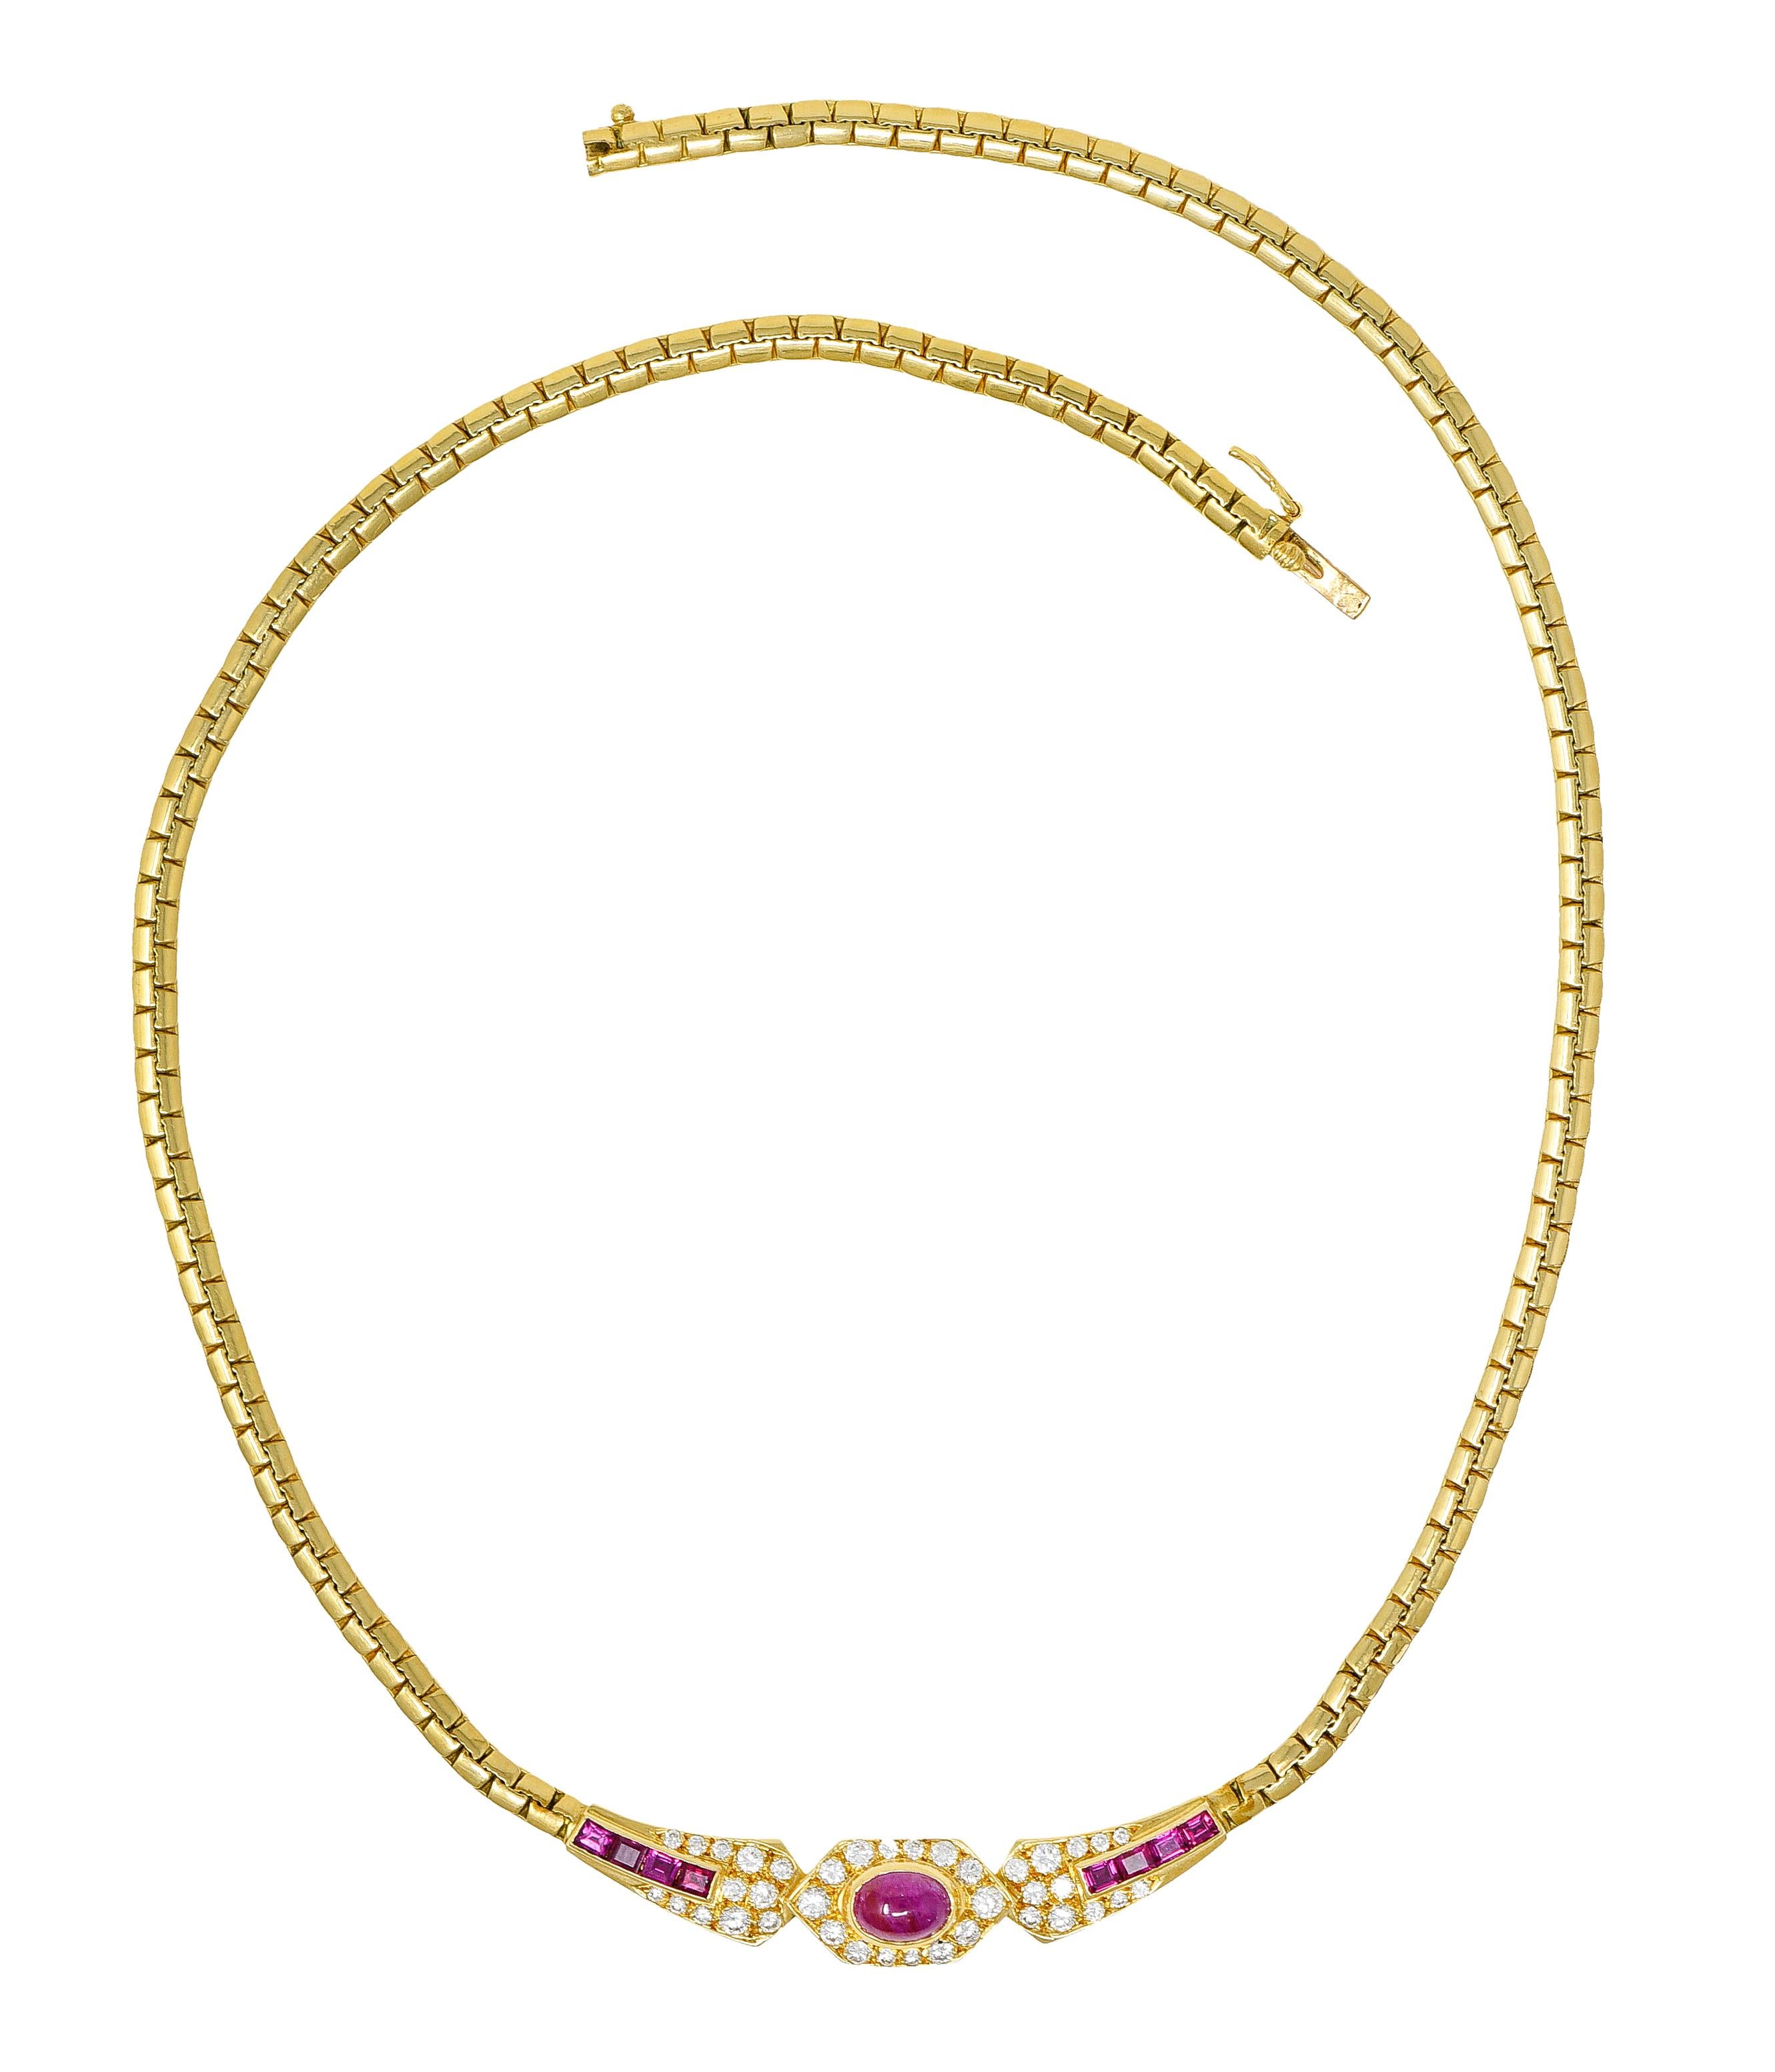 Collar necklace is comprised of brightly polished brick link chain

With a geometric central station

Featuring on oval cut ruby cabochon flanked by channel set rectangular cut rubies

Transparent to translucent slightly purplish red in color while